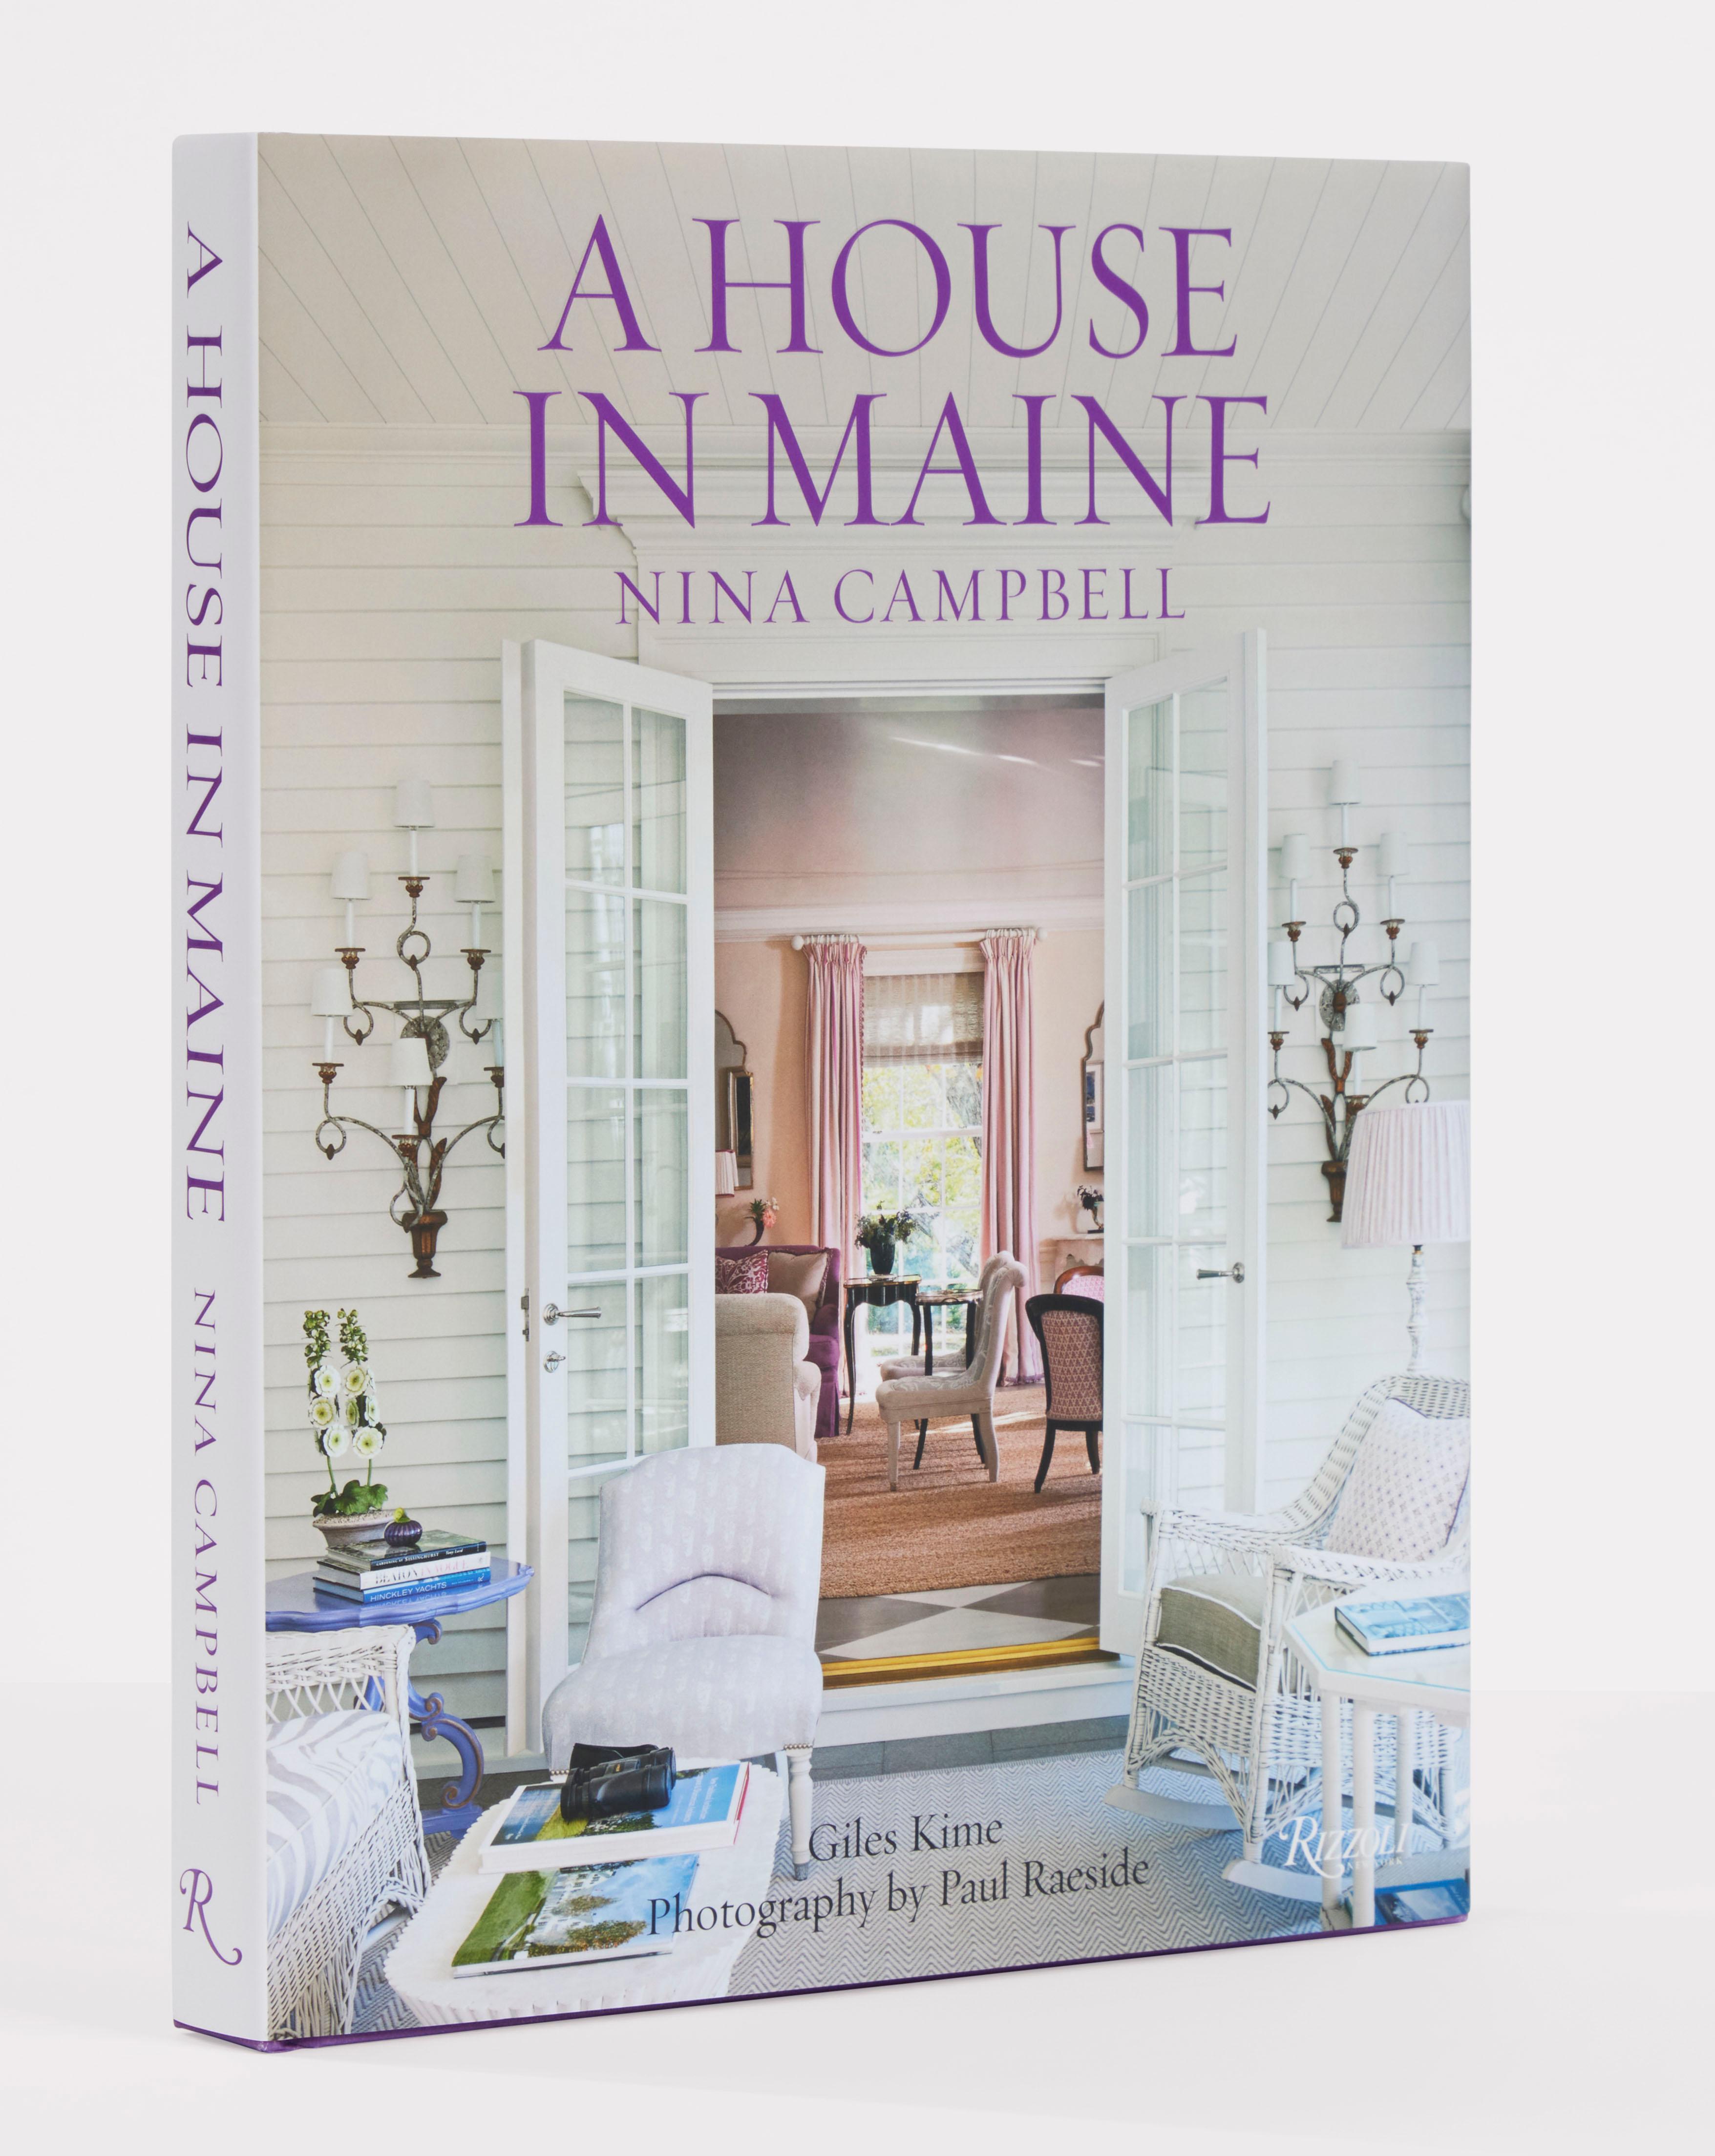 Author Nina Campbell, with Giles Kime, Photographs by Paul Raeside

The interior design of this New England seaside escape—by decorating legend Nina Campbell—explores a myriad of themes: the evolution of a home, the importance of place, and the